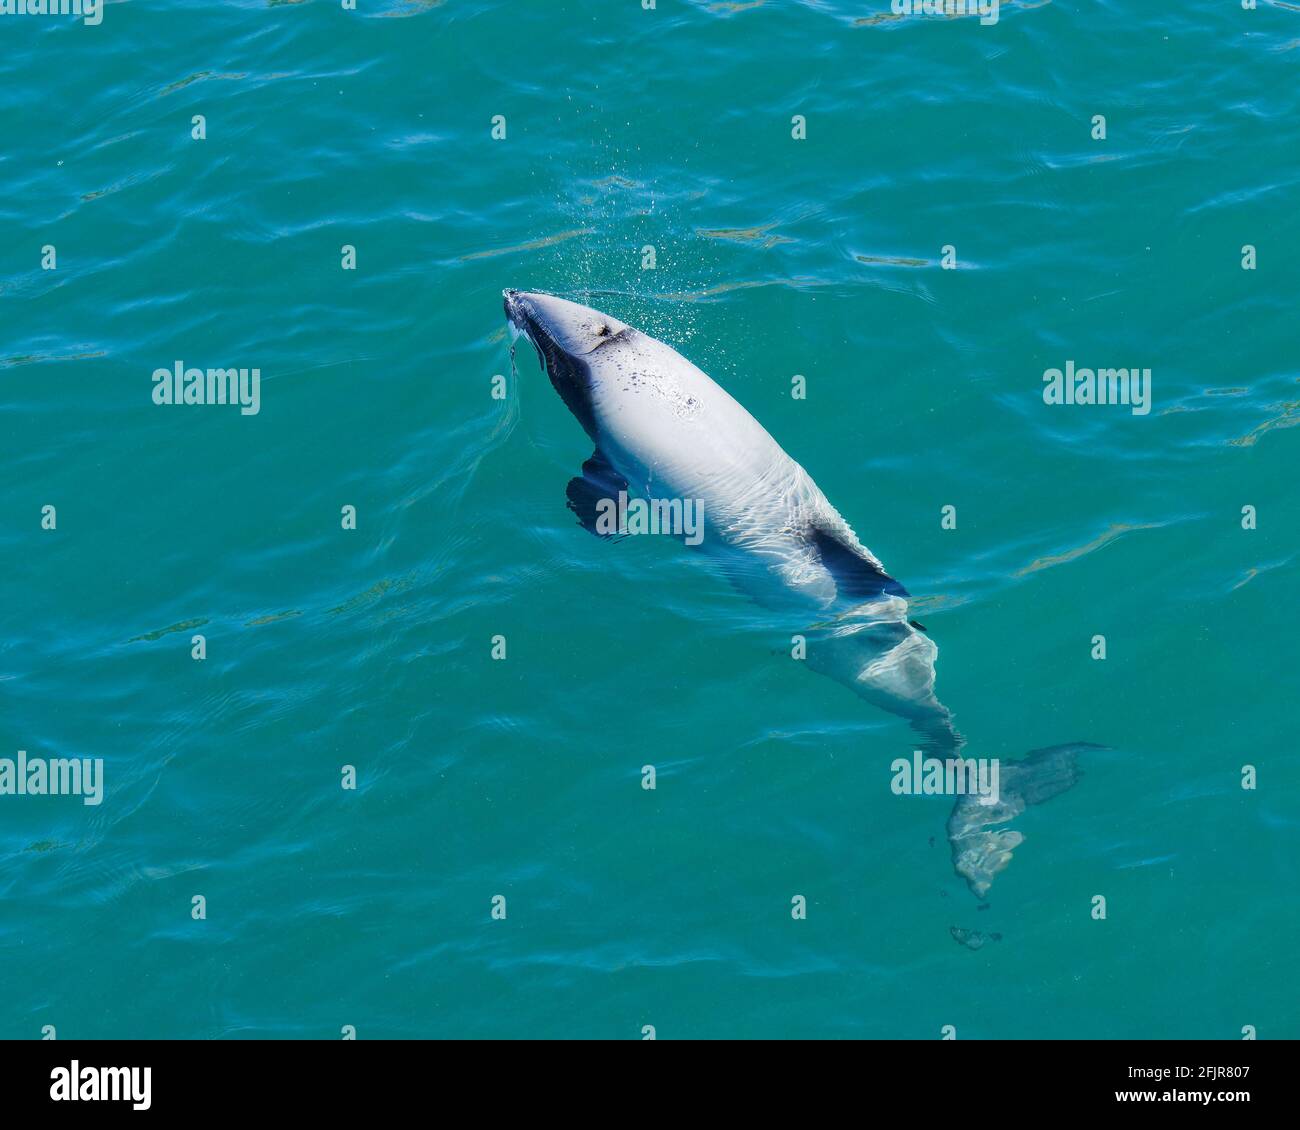 Hectors dolphin, endangered dolphin, New Zealand. Cetacean endemic to New Zealand Stock Photo